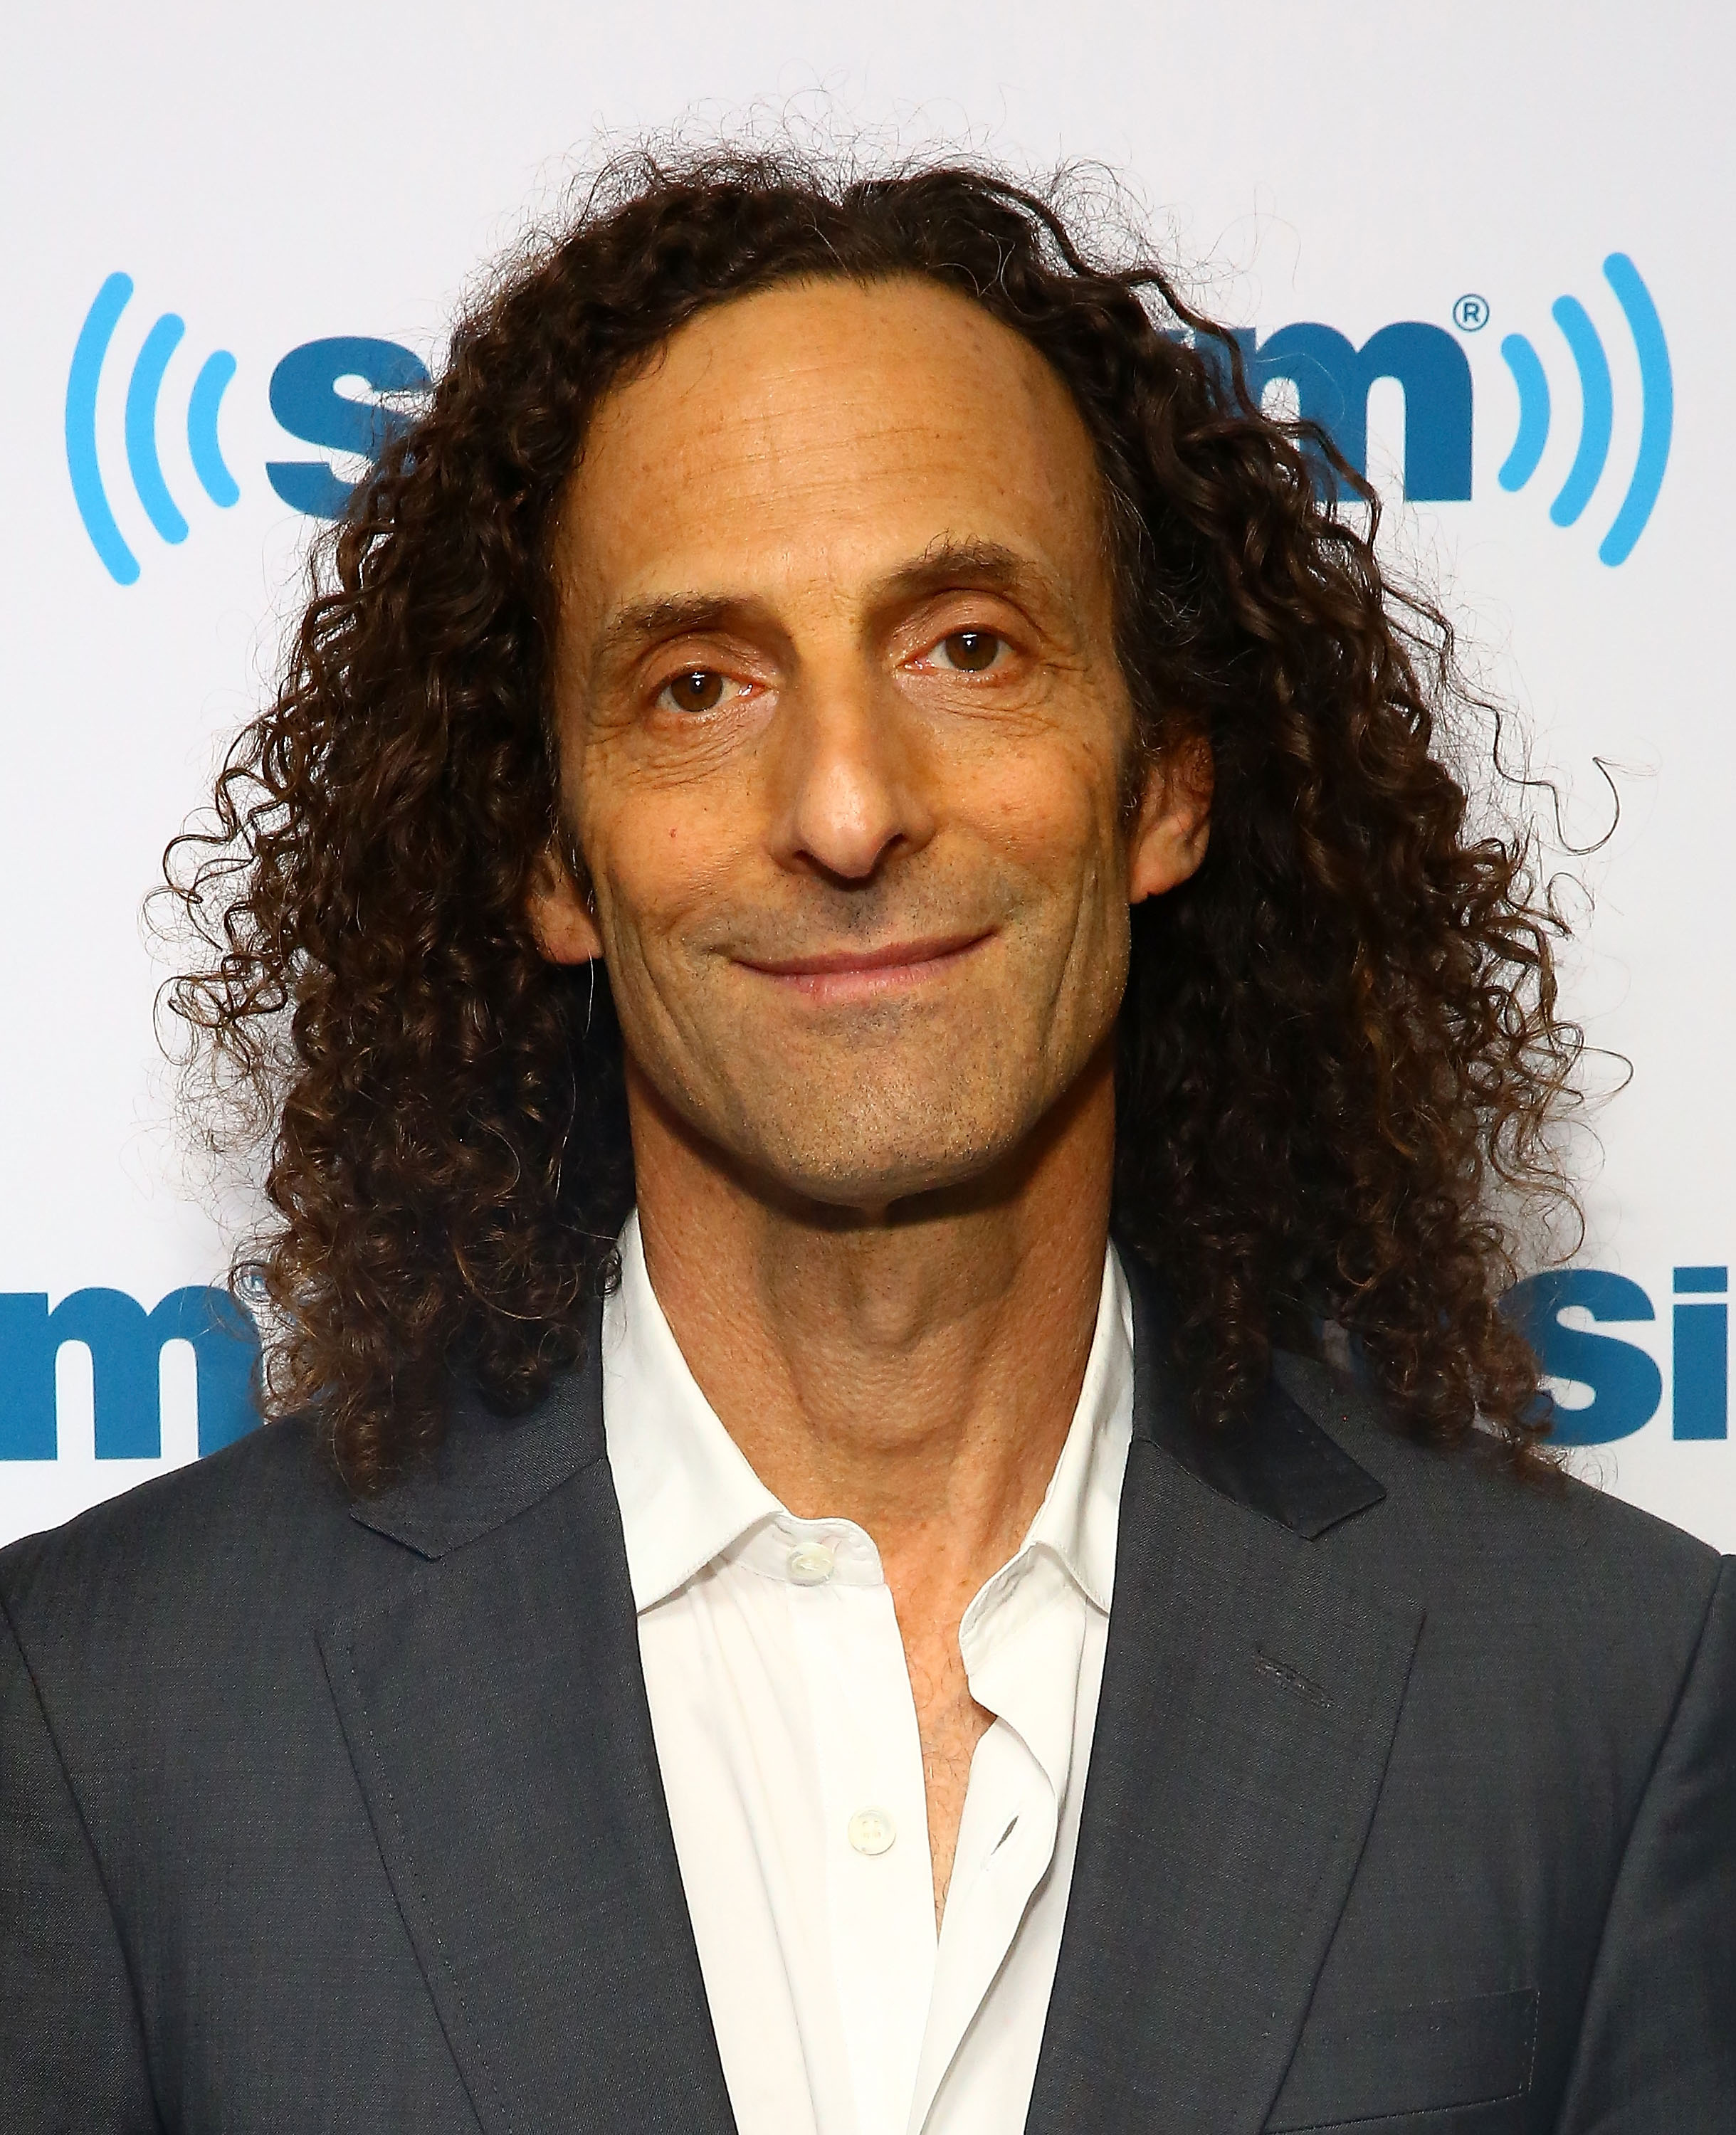 Musician Kenny G visits the SiriusXM Studios on Jan. 28, 2015 in New York City.